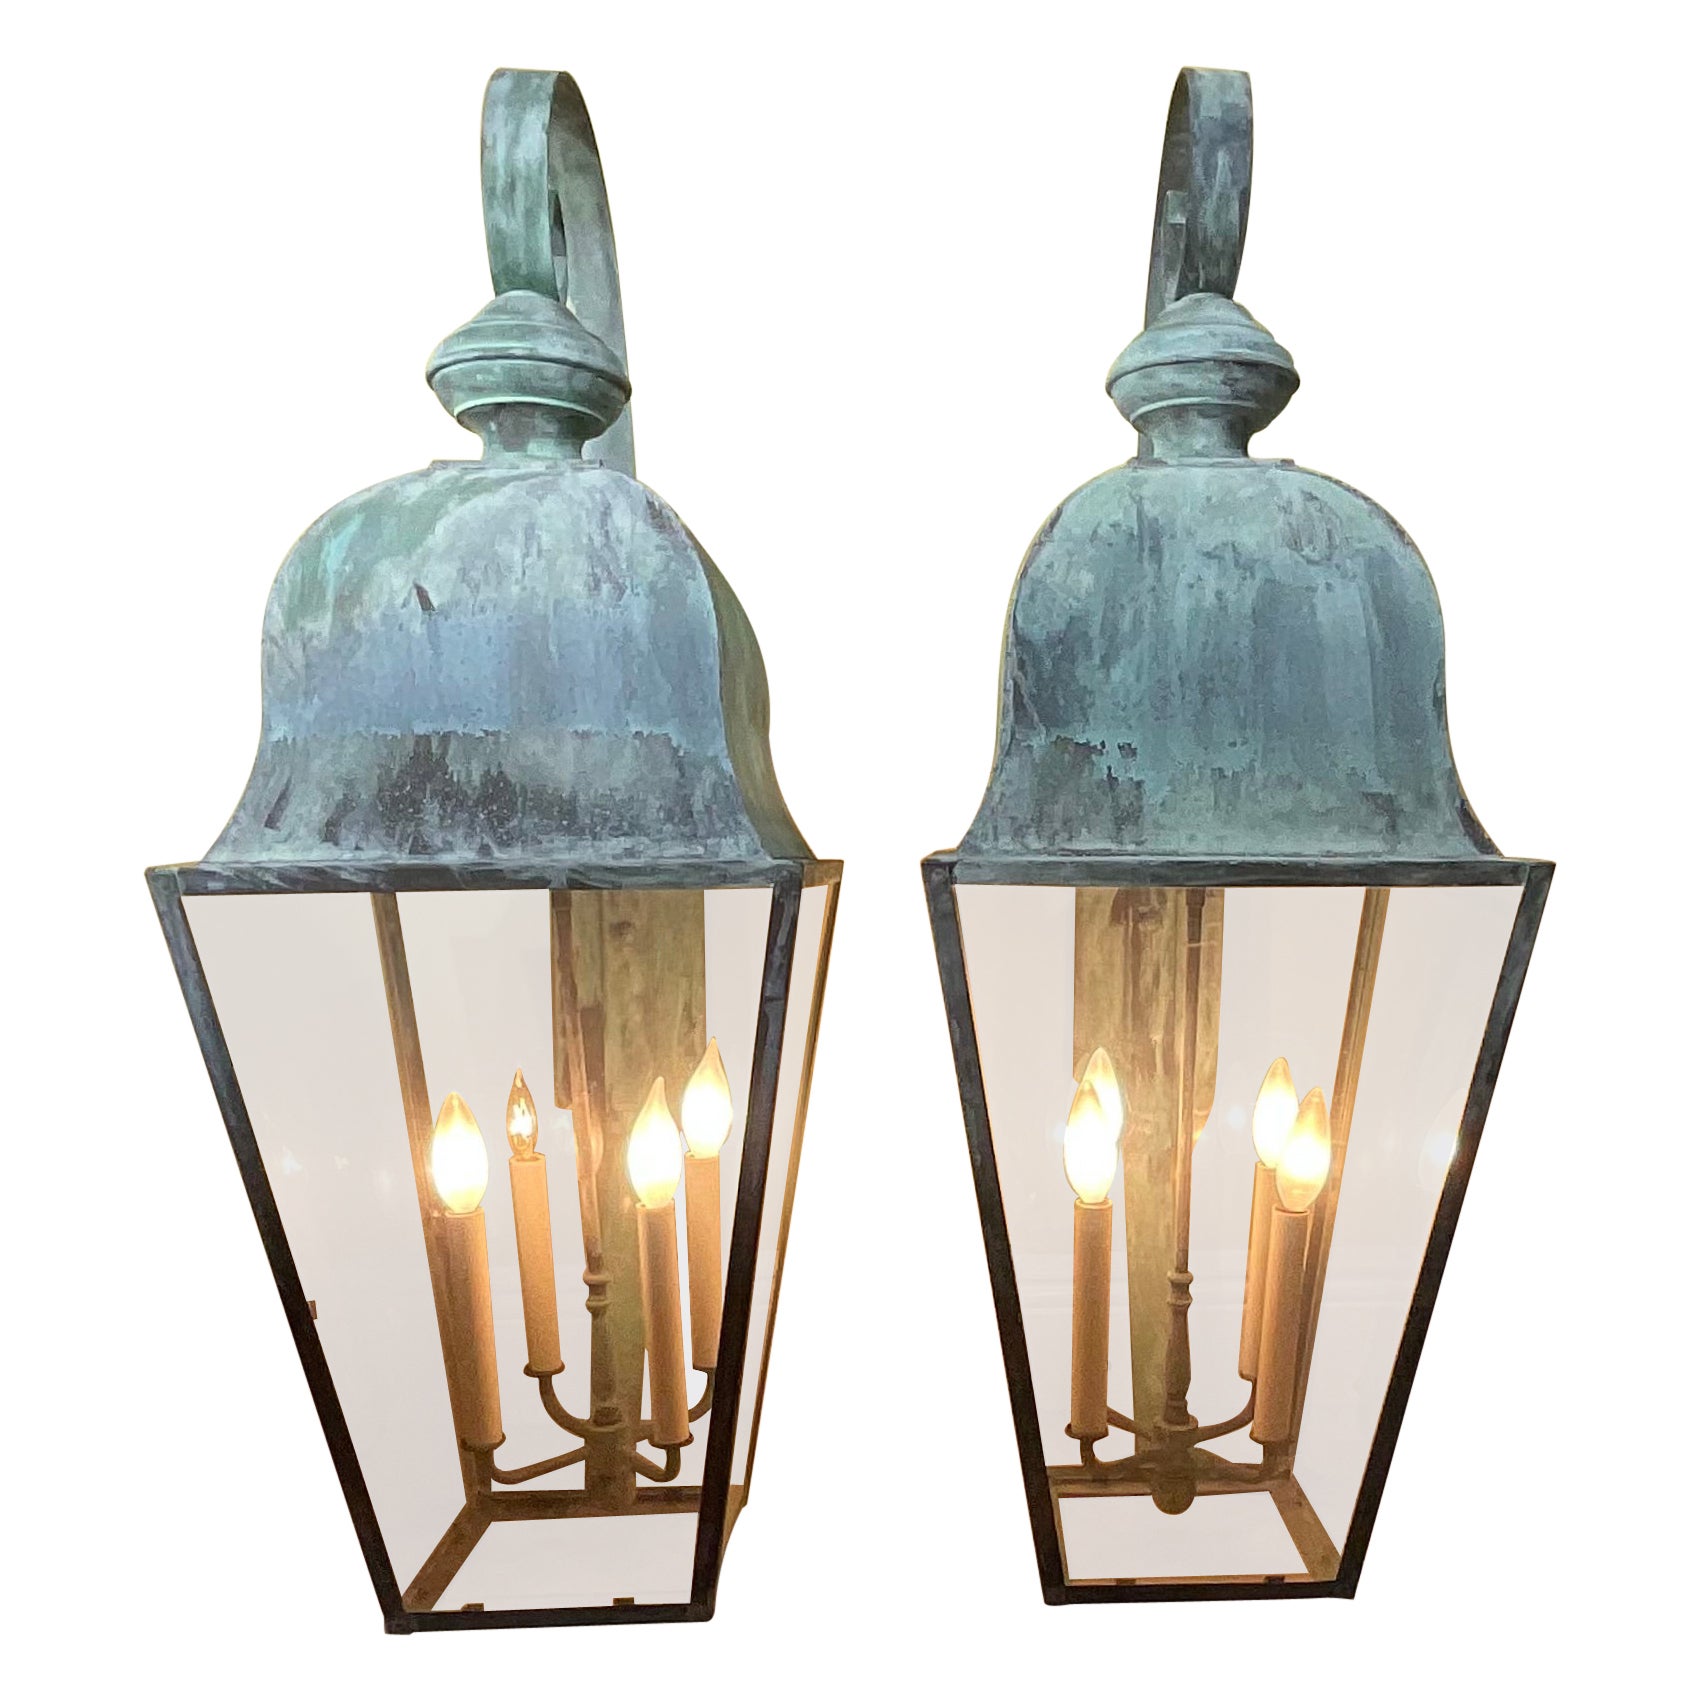 Large Pair of Vintage Handcrafted Wall-Mounted Solid Brass Lantern